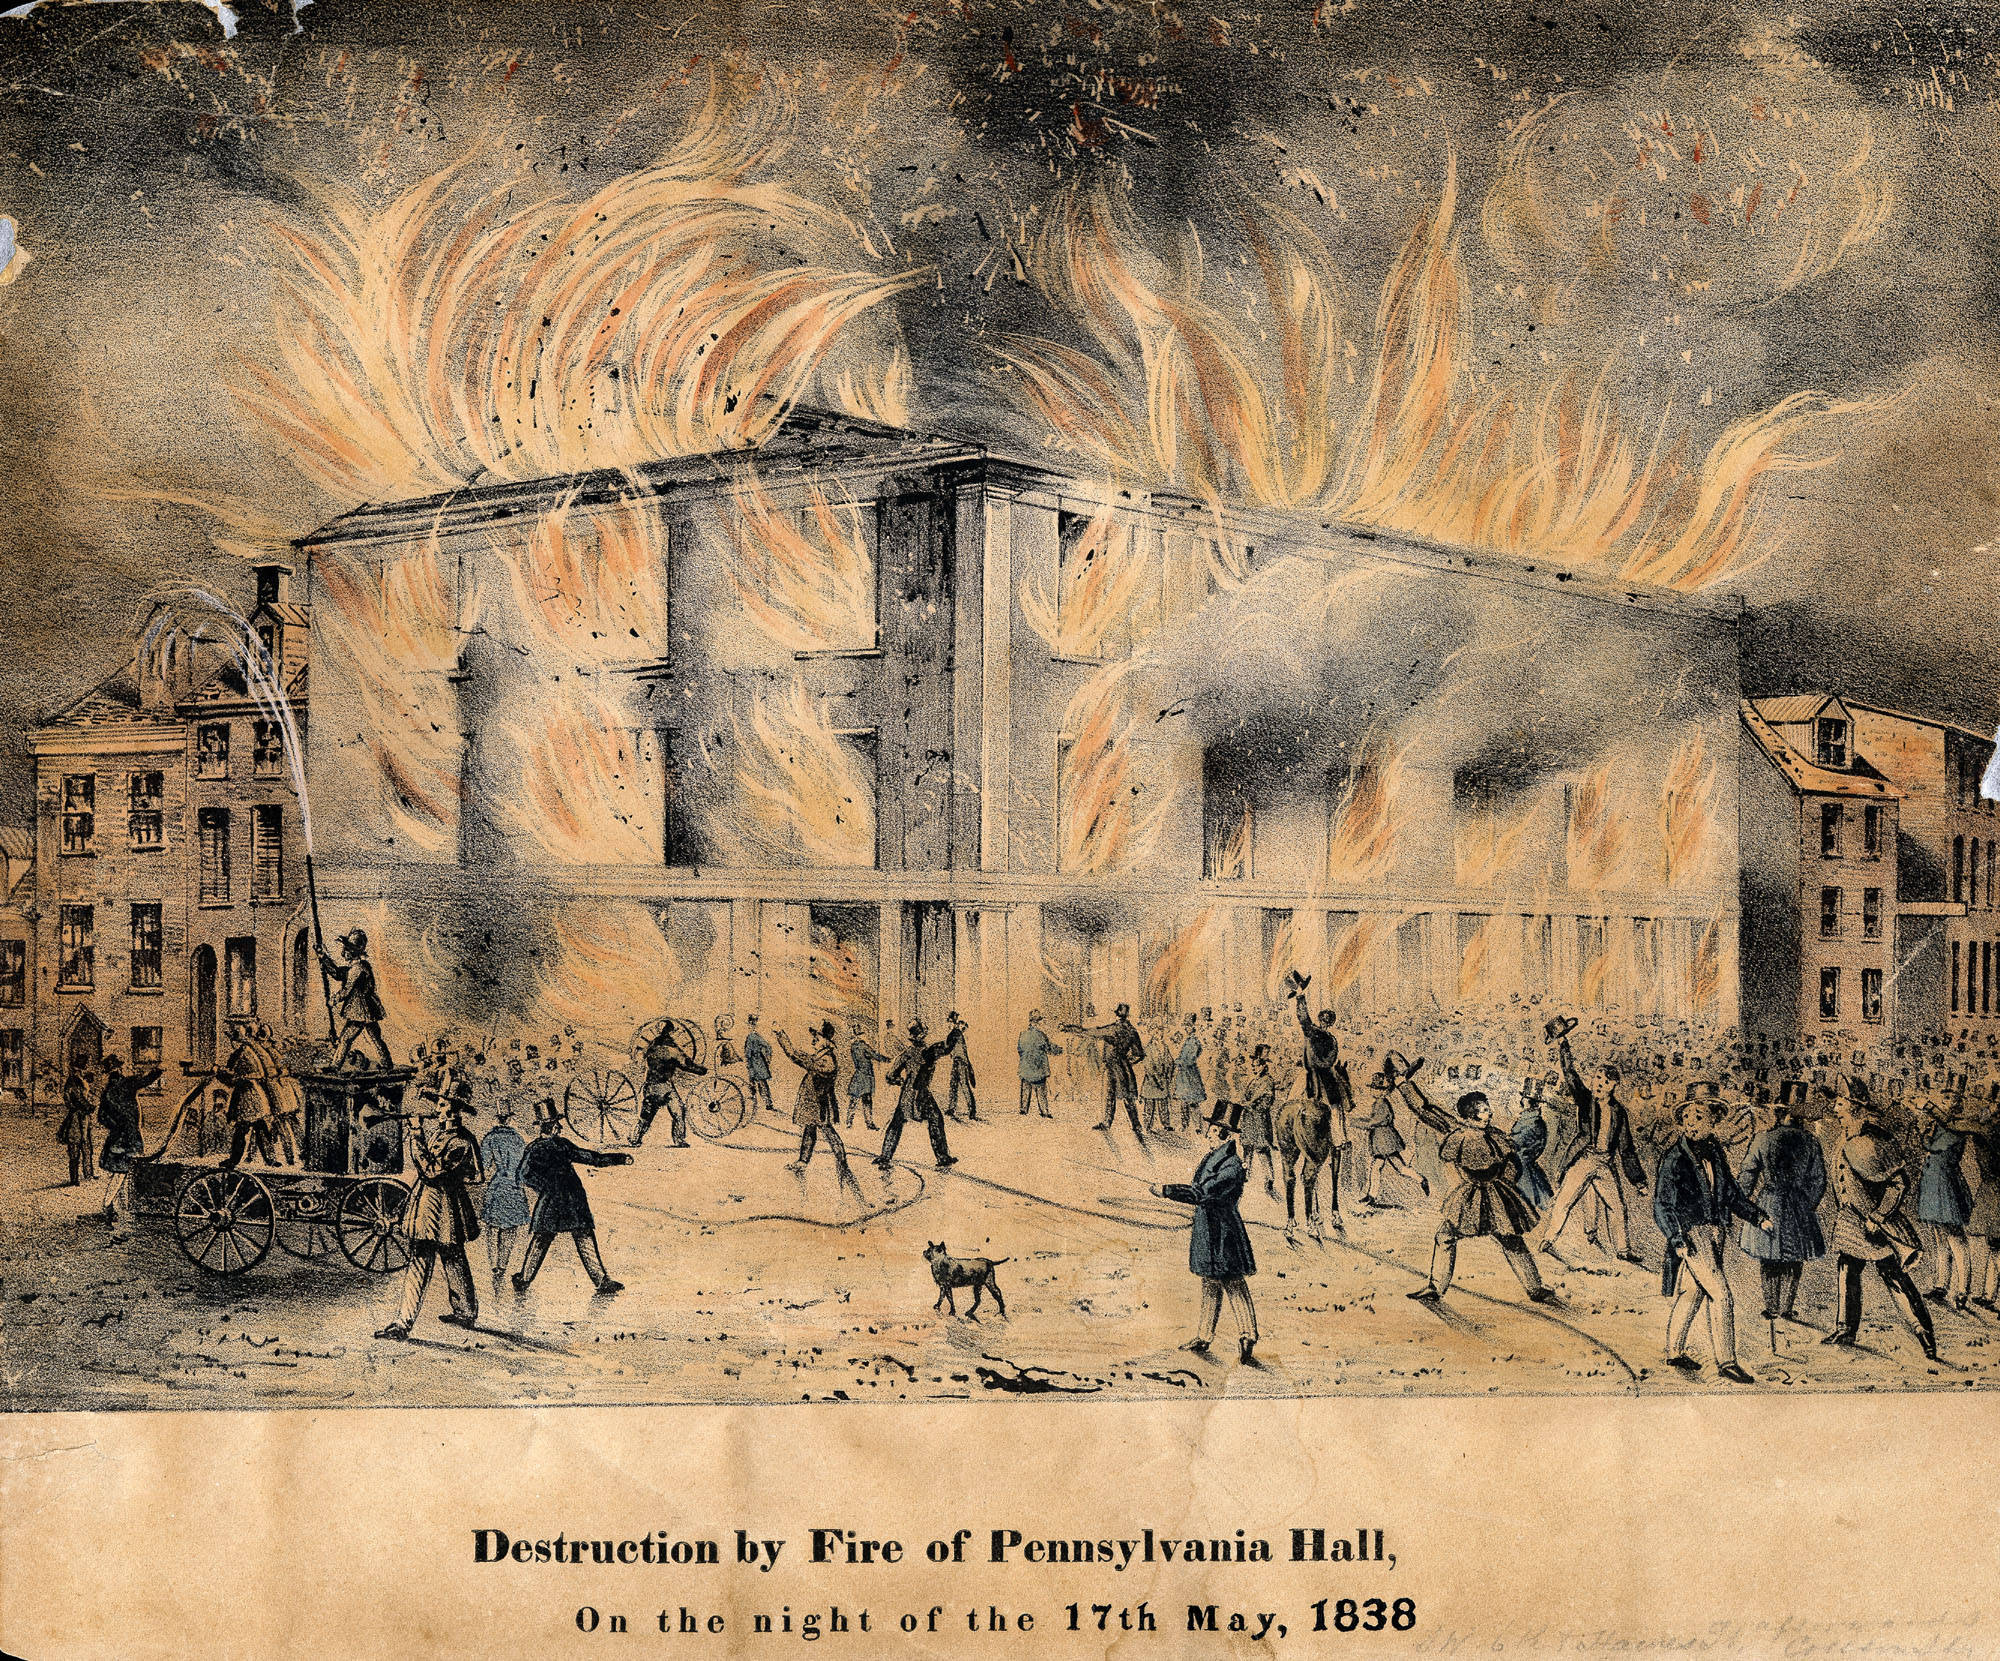 Constructed from 1837 to 1838 as a meeting place for local abolitionist groups, Pennsylvania Hall in Philadelphia was set on fire and destroyed by an anti-abolitionist mob just three days after dedication ceremonies on May 14, 1838. 